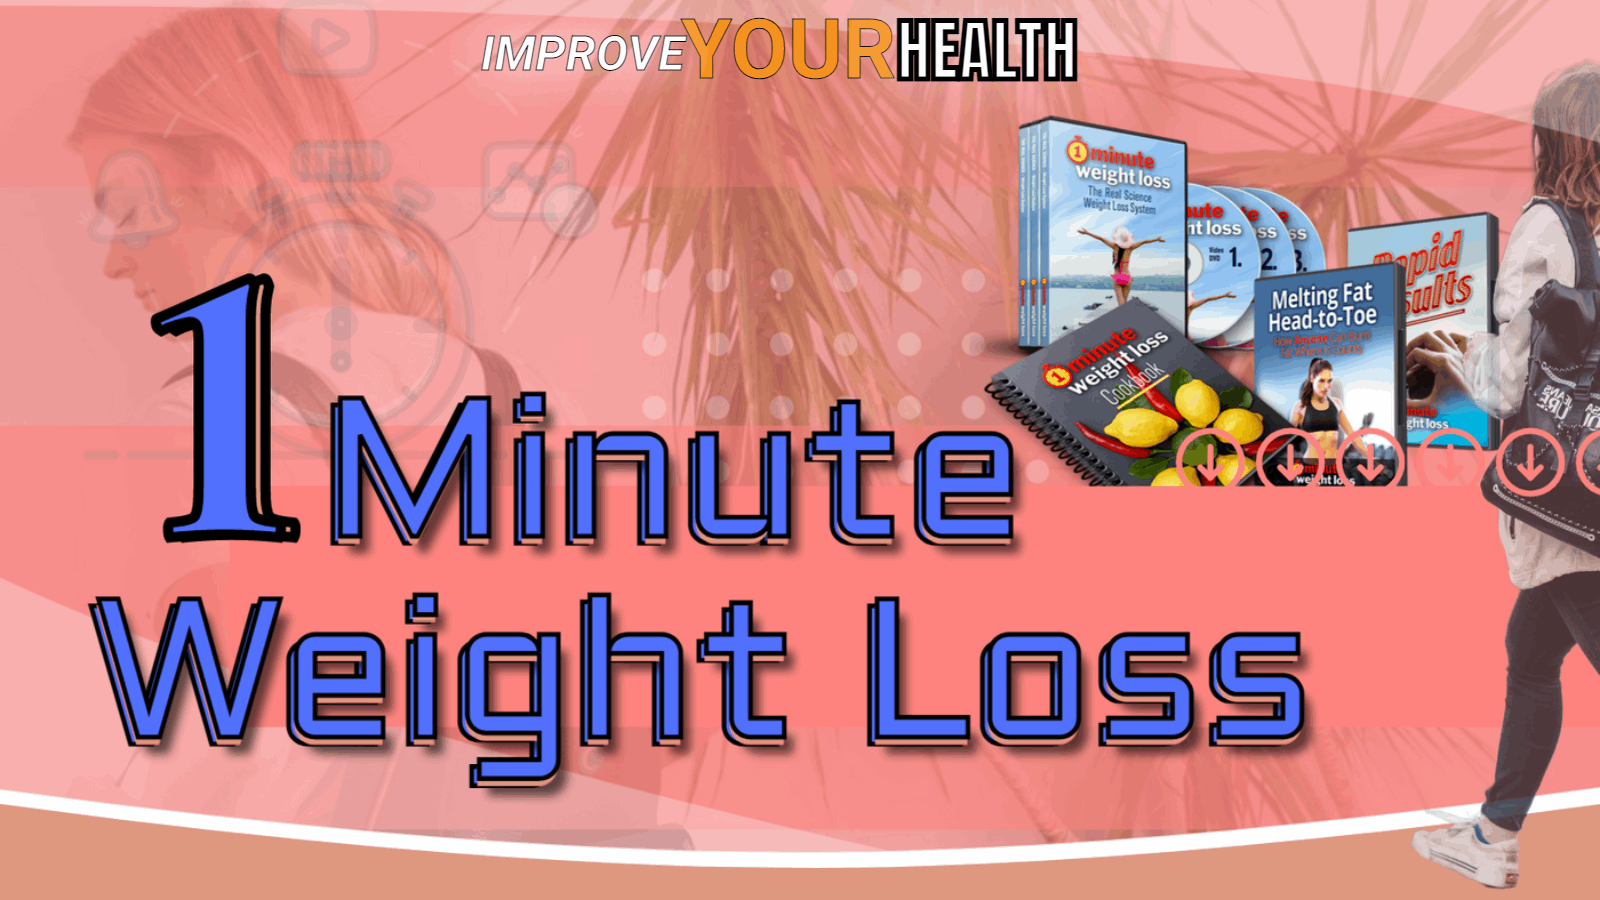 1 minute weight loss